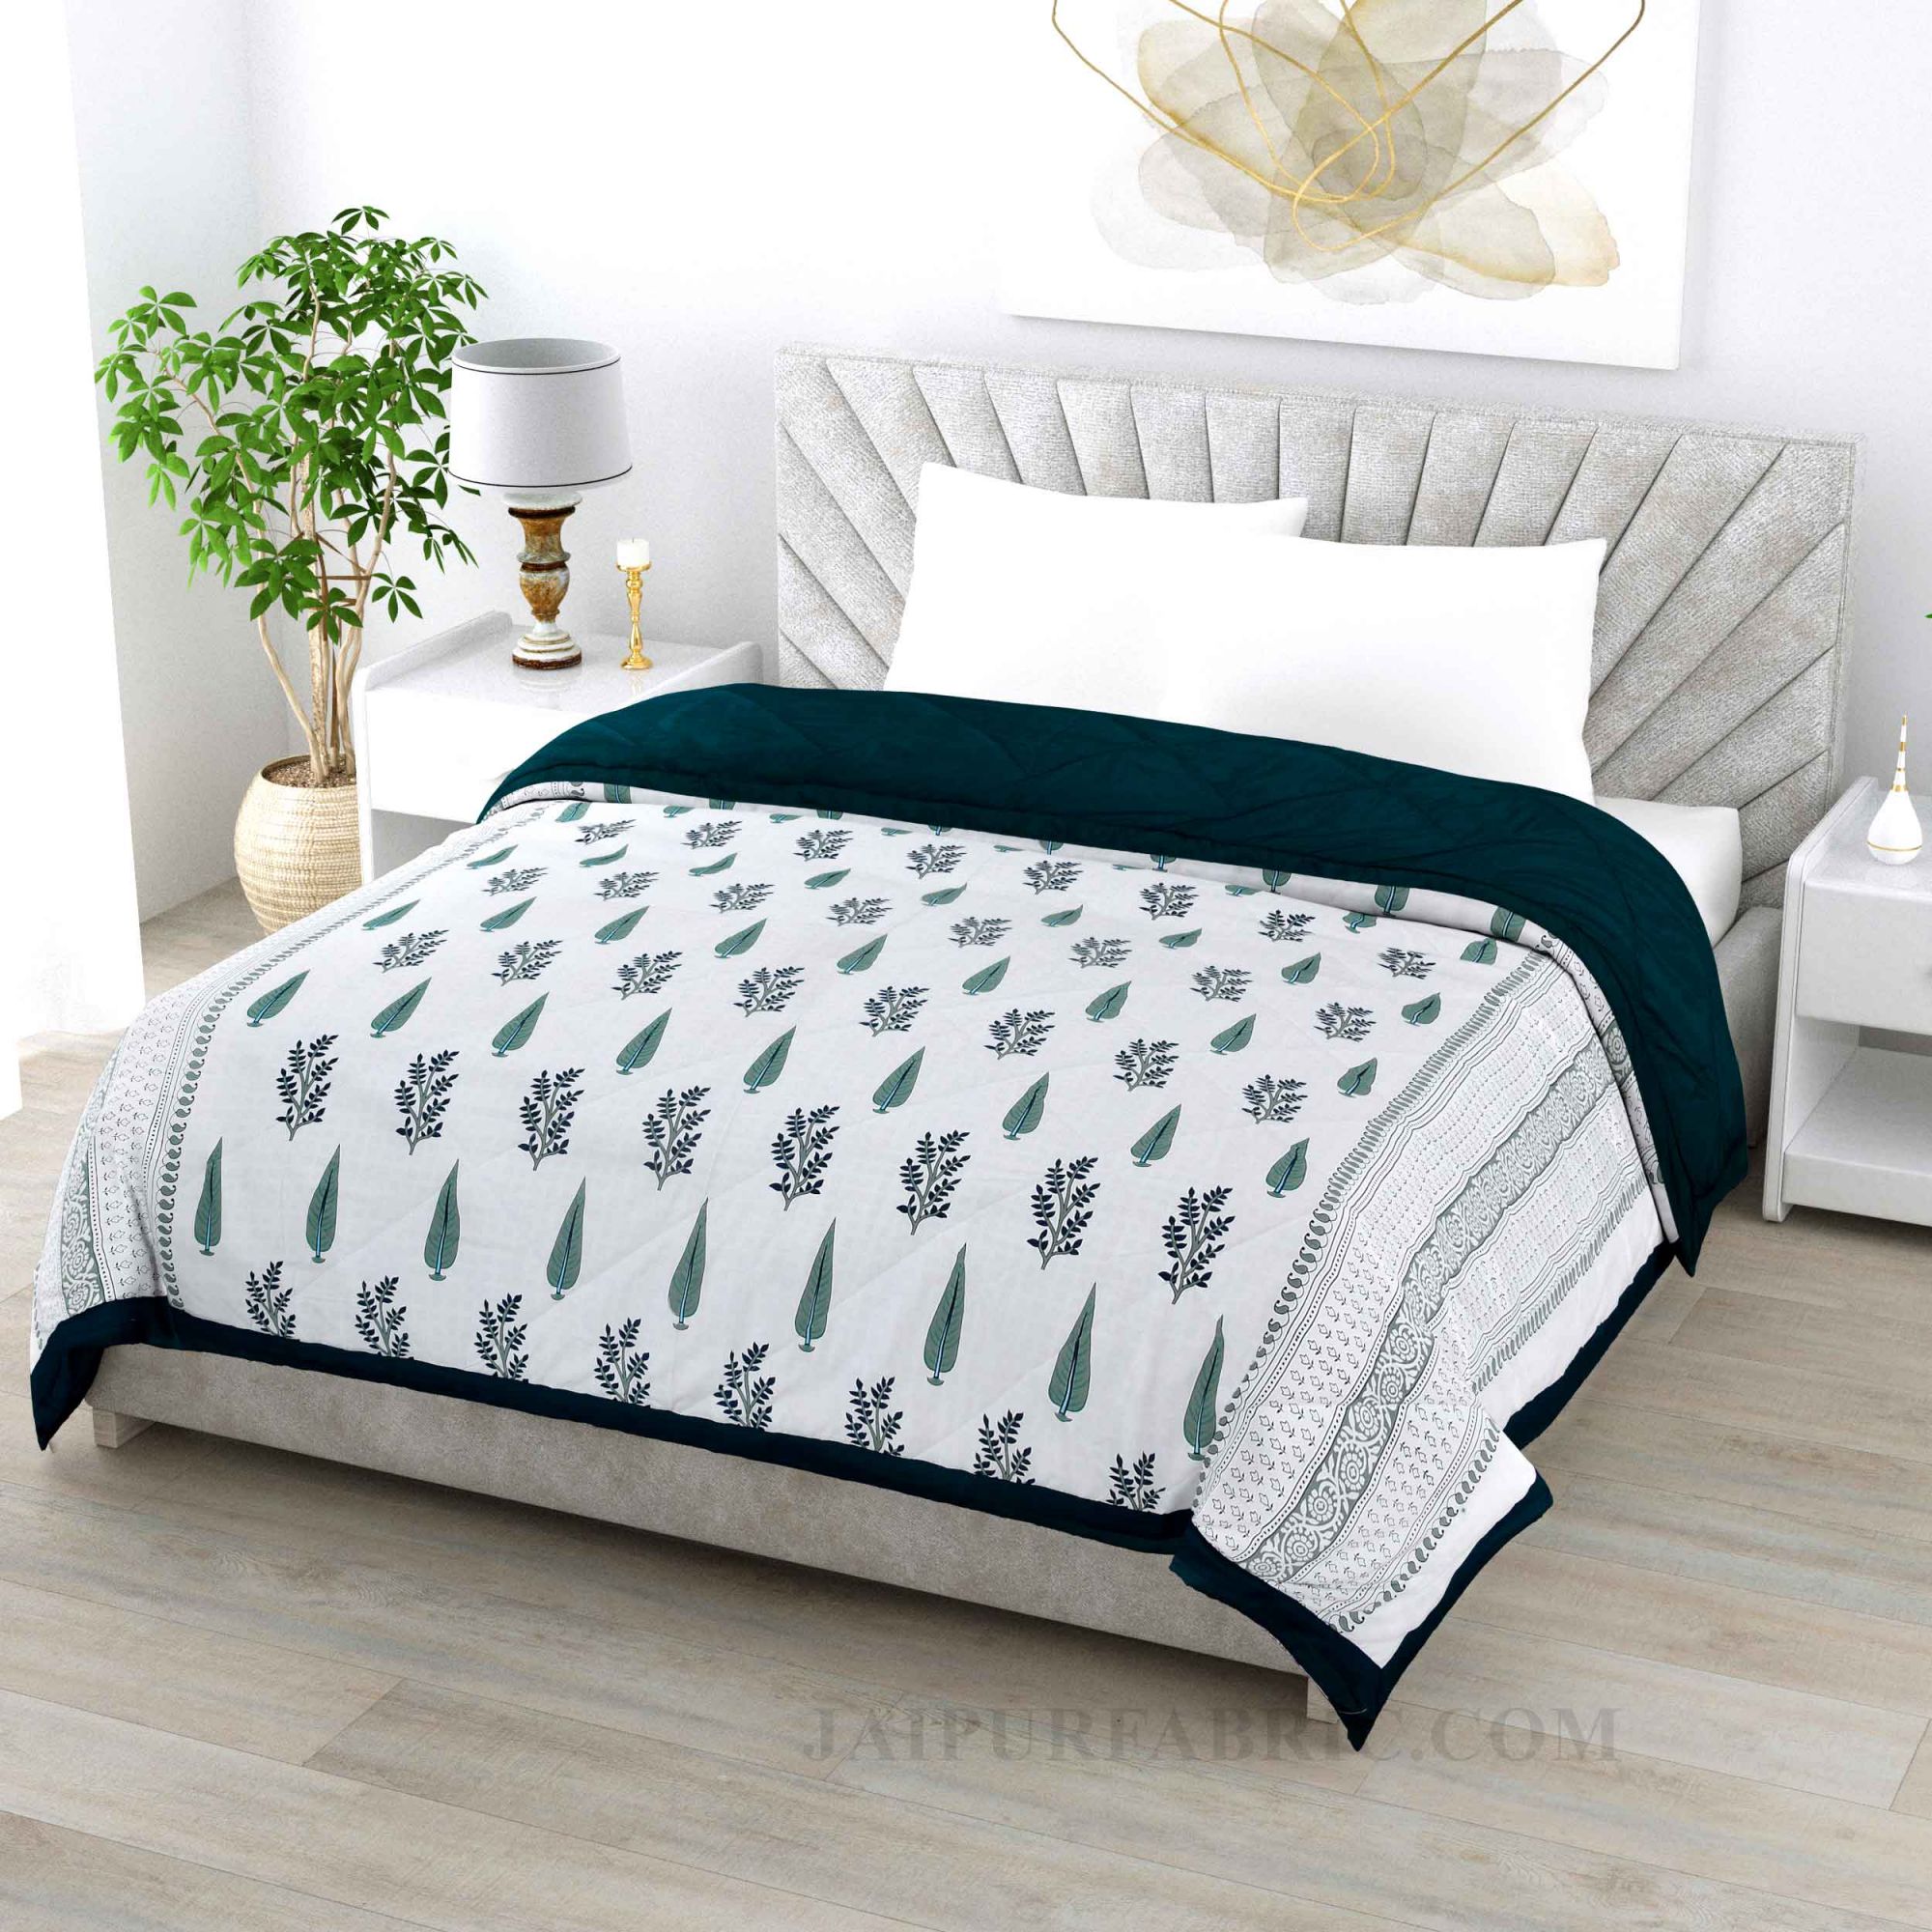 Twigs & Trees Green Cotton Quilted Bedcover Comforter Blanket